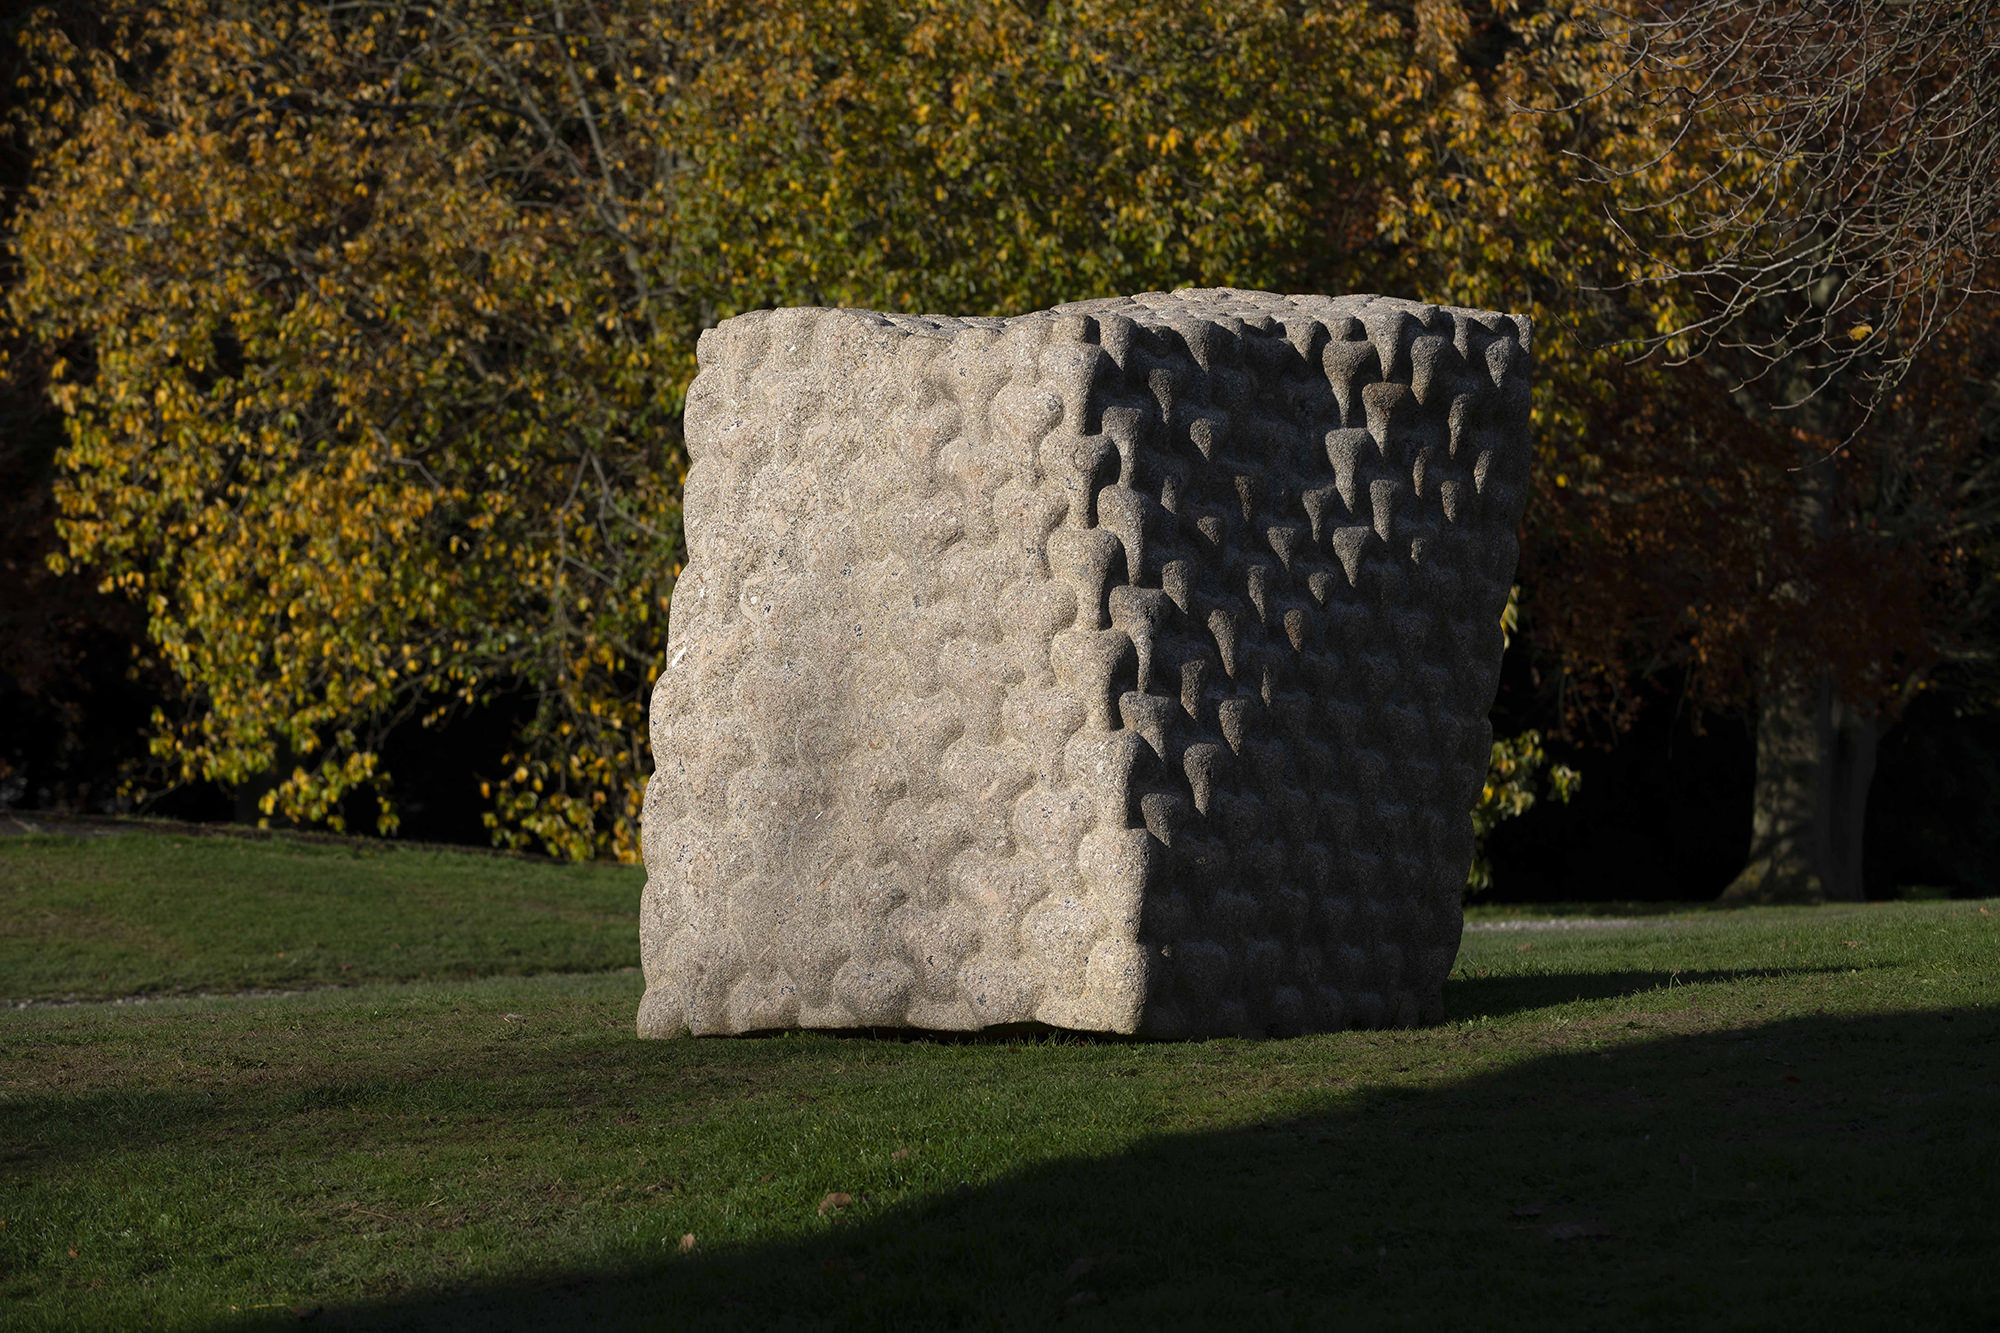 Peter Randall Page Envelope of Pulsation For Leo 2017 Courtesy the artist at Yorkshire Sculpture Park